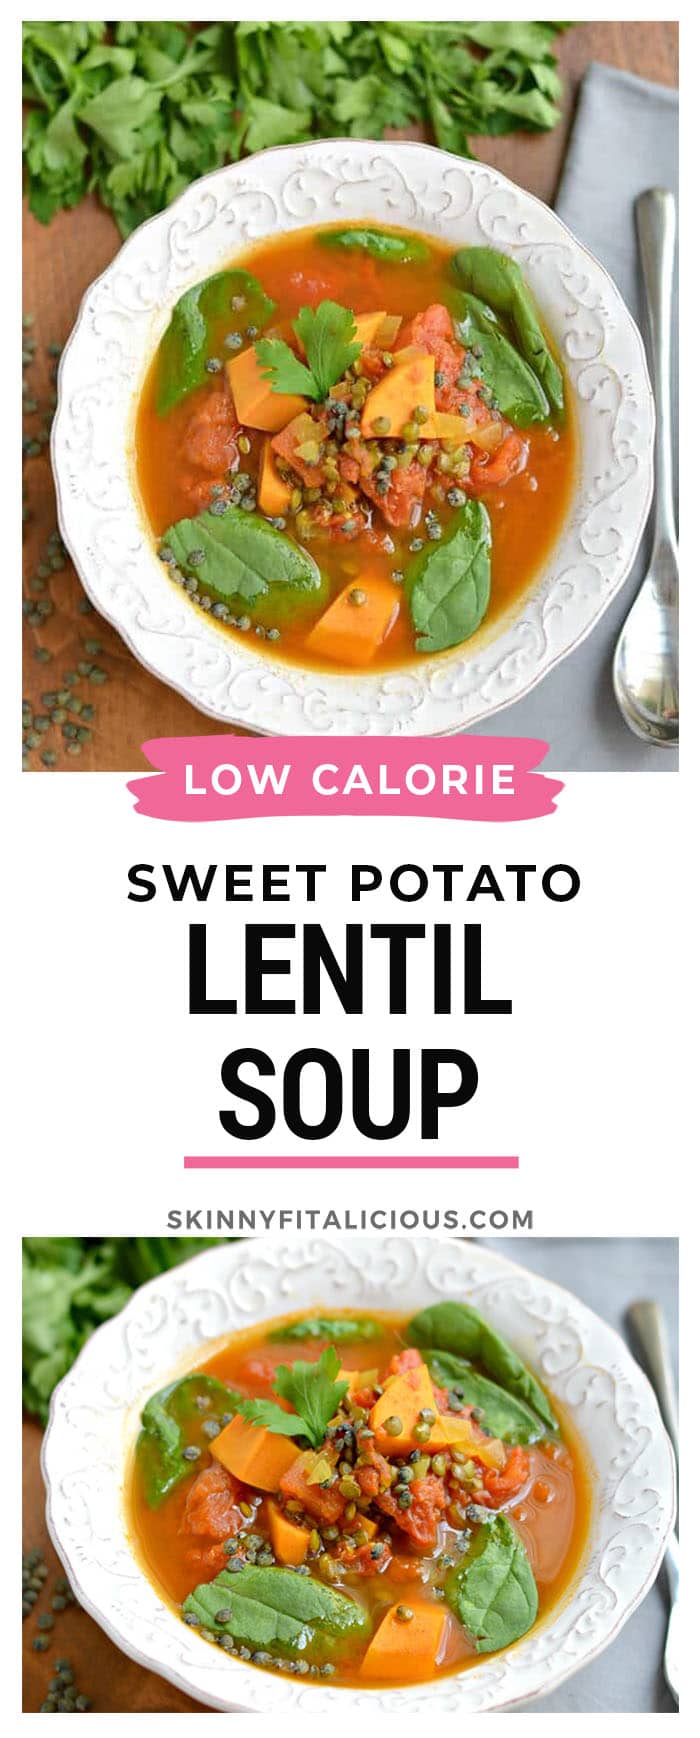 Low fat Lentil Sweet Potato Soup is a one pot wonder! Bursting with flavorful comforting spices, this 30 minute soup makes a satisfying vegan meal even non vegan's will love! Gluten Free + Low Calorie + Vegan